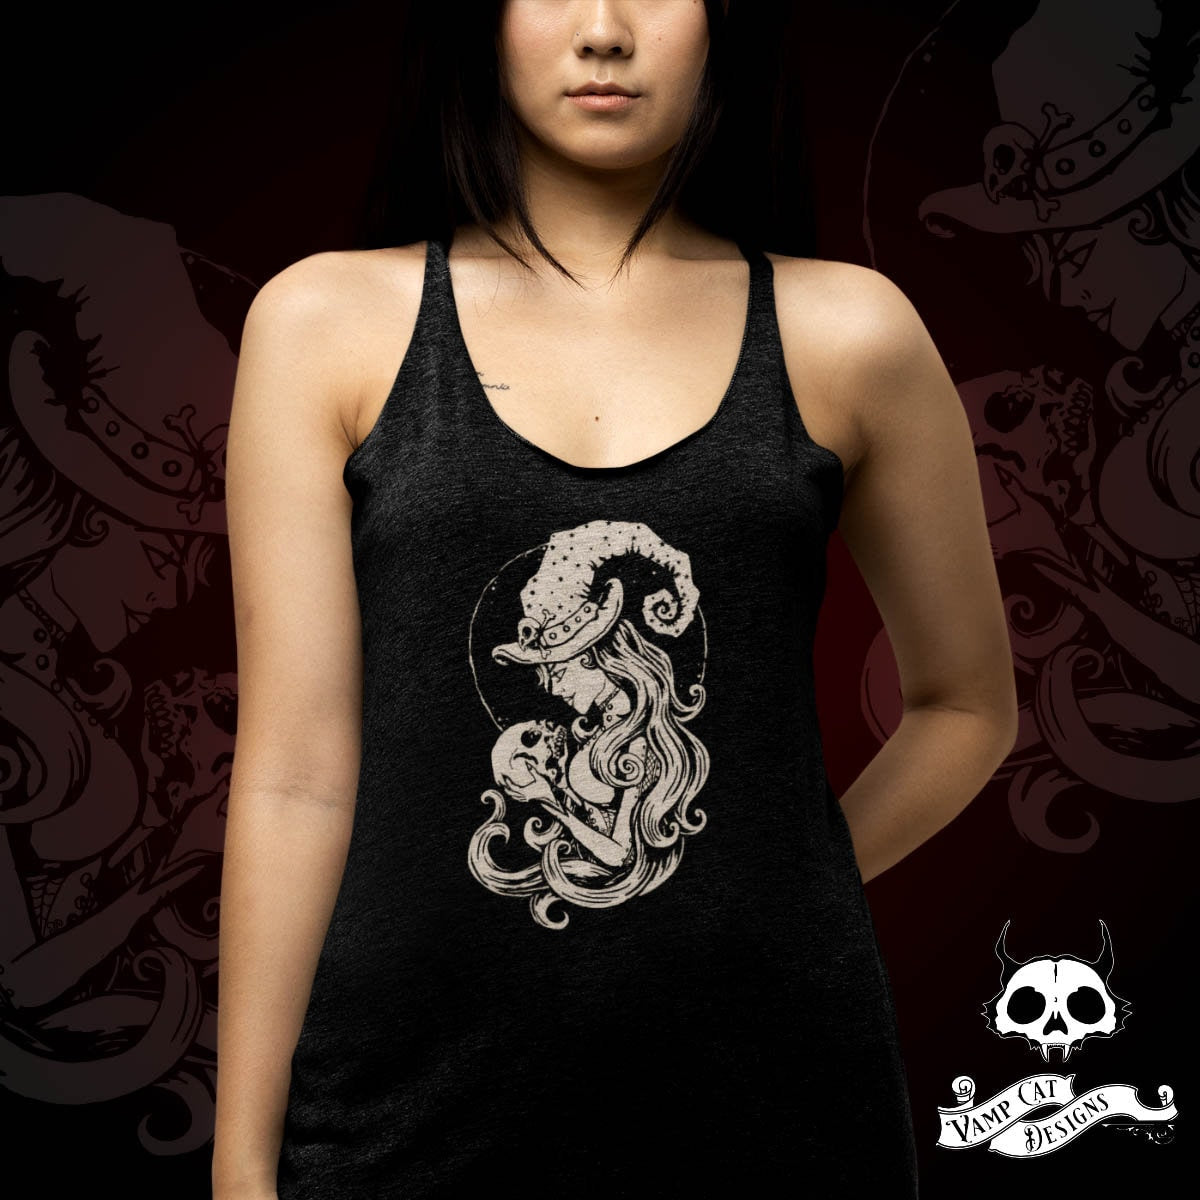 Skull Witch-Tank Top-Witchy Art Apparel-Graphic Tee-Gothic Clothing-Skulls And Bones Art-Occult Art-Halloween Women's Tee-Fall Shirt-Witchy